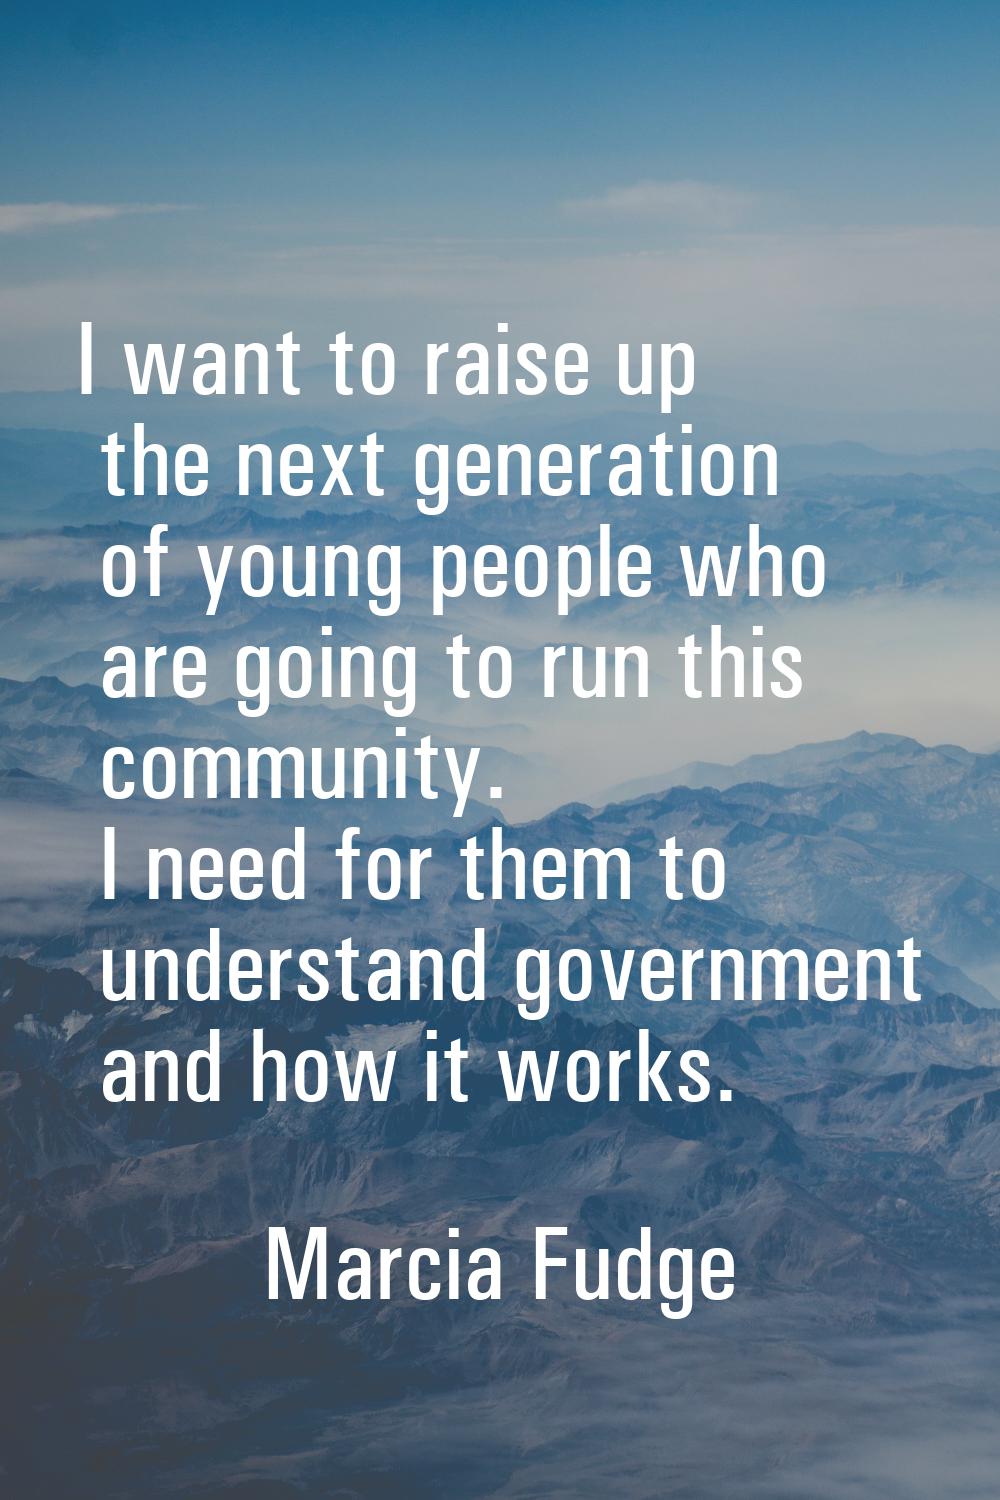 I want to raise up the next generation of young people who are going to run this community. I need 